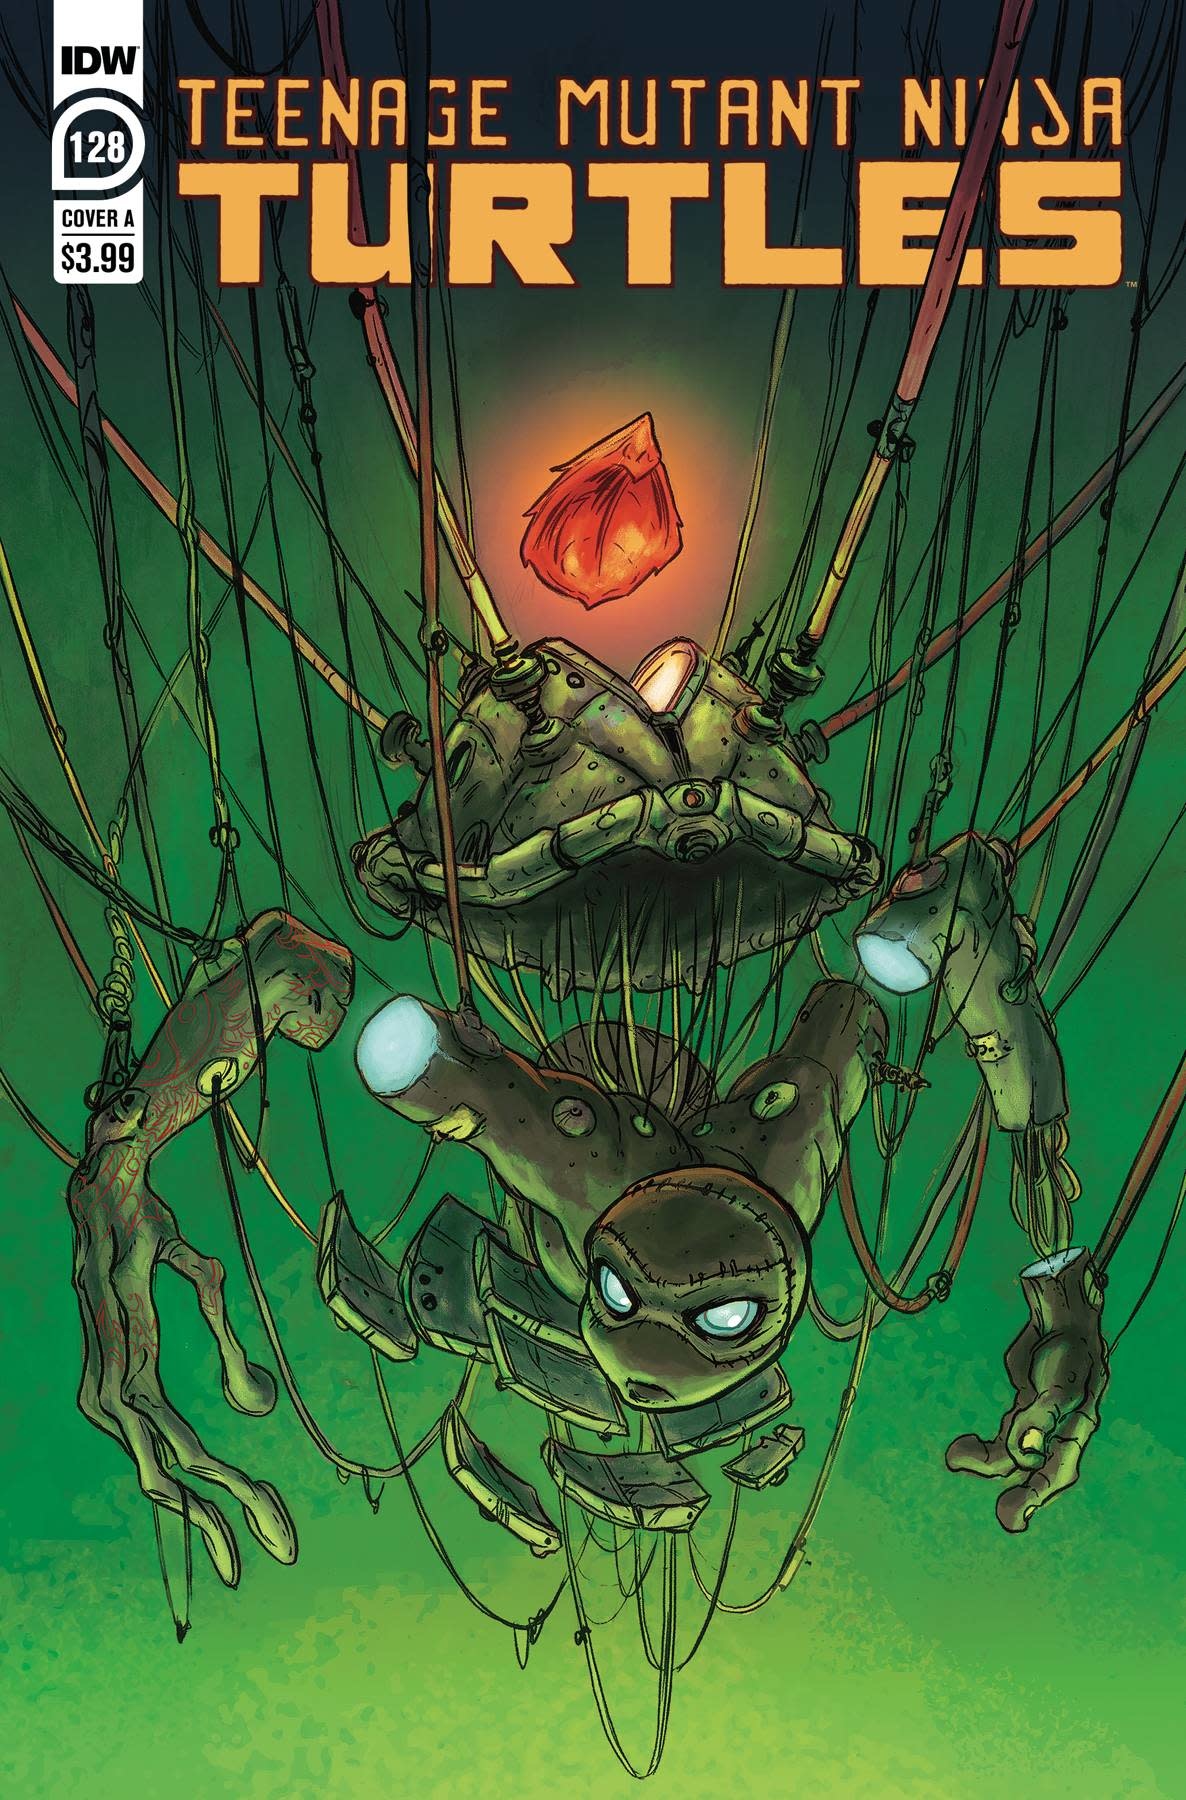 TMNT TMNT Ongoing #128